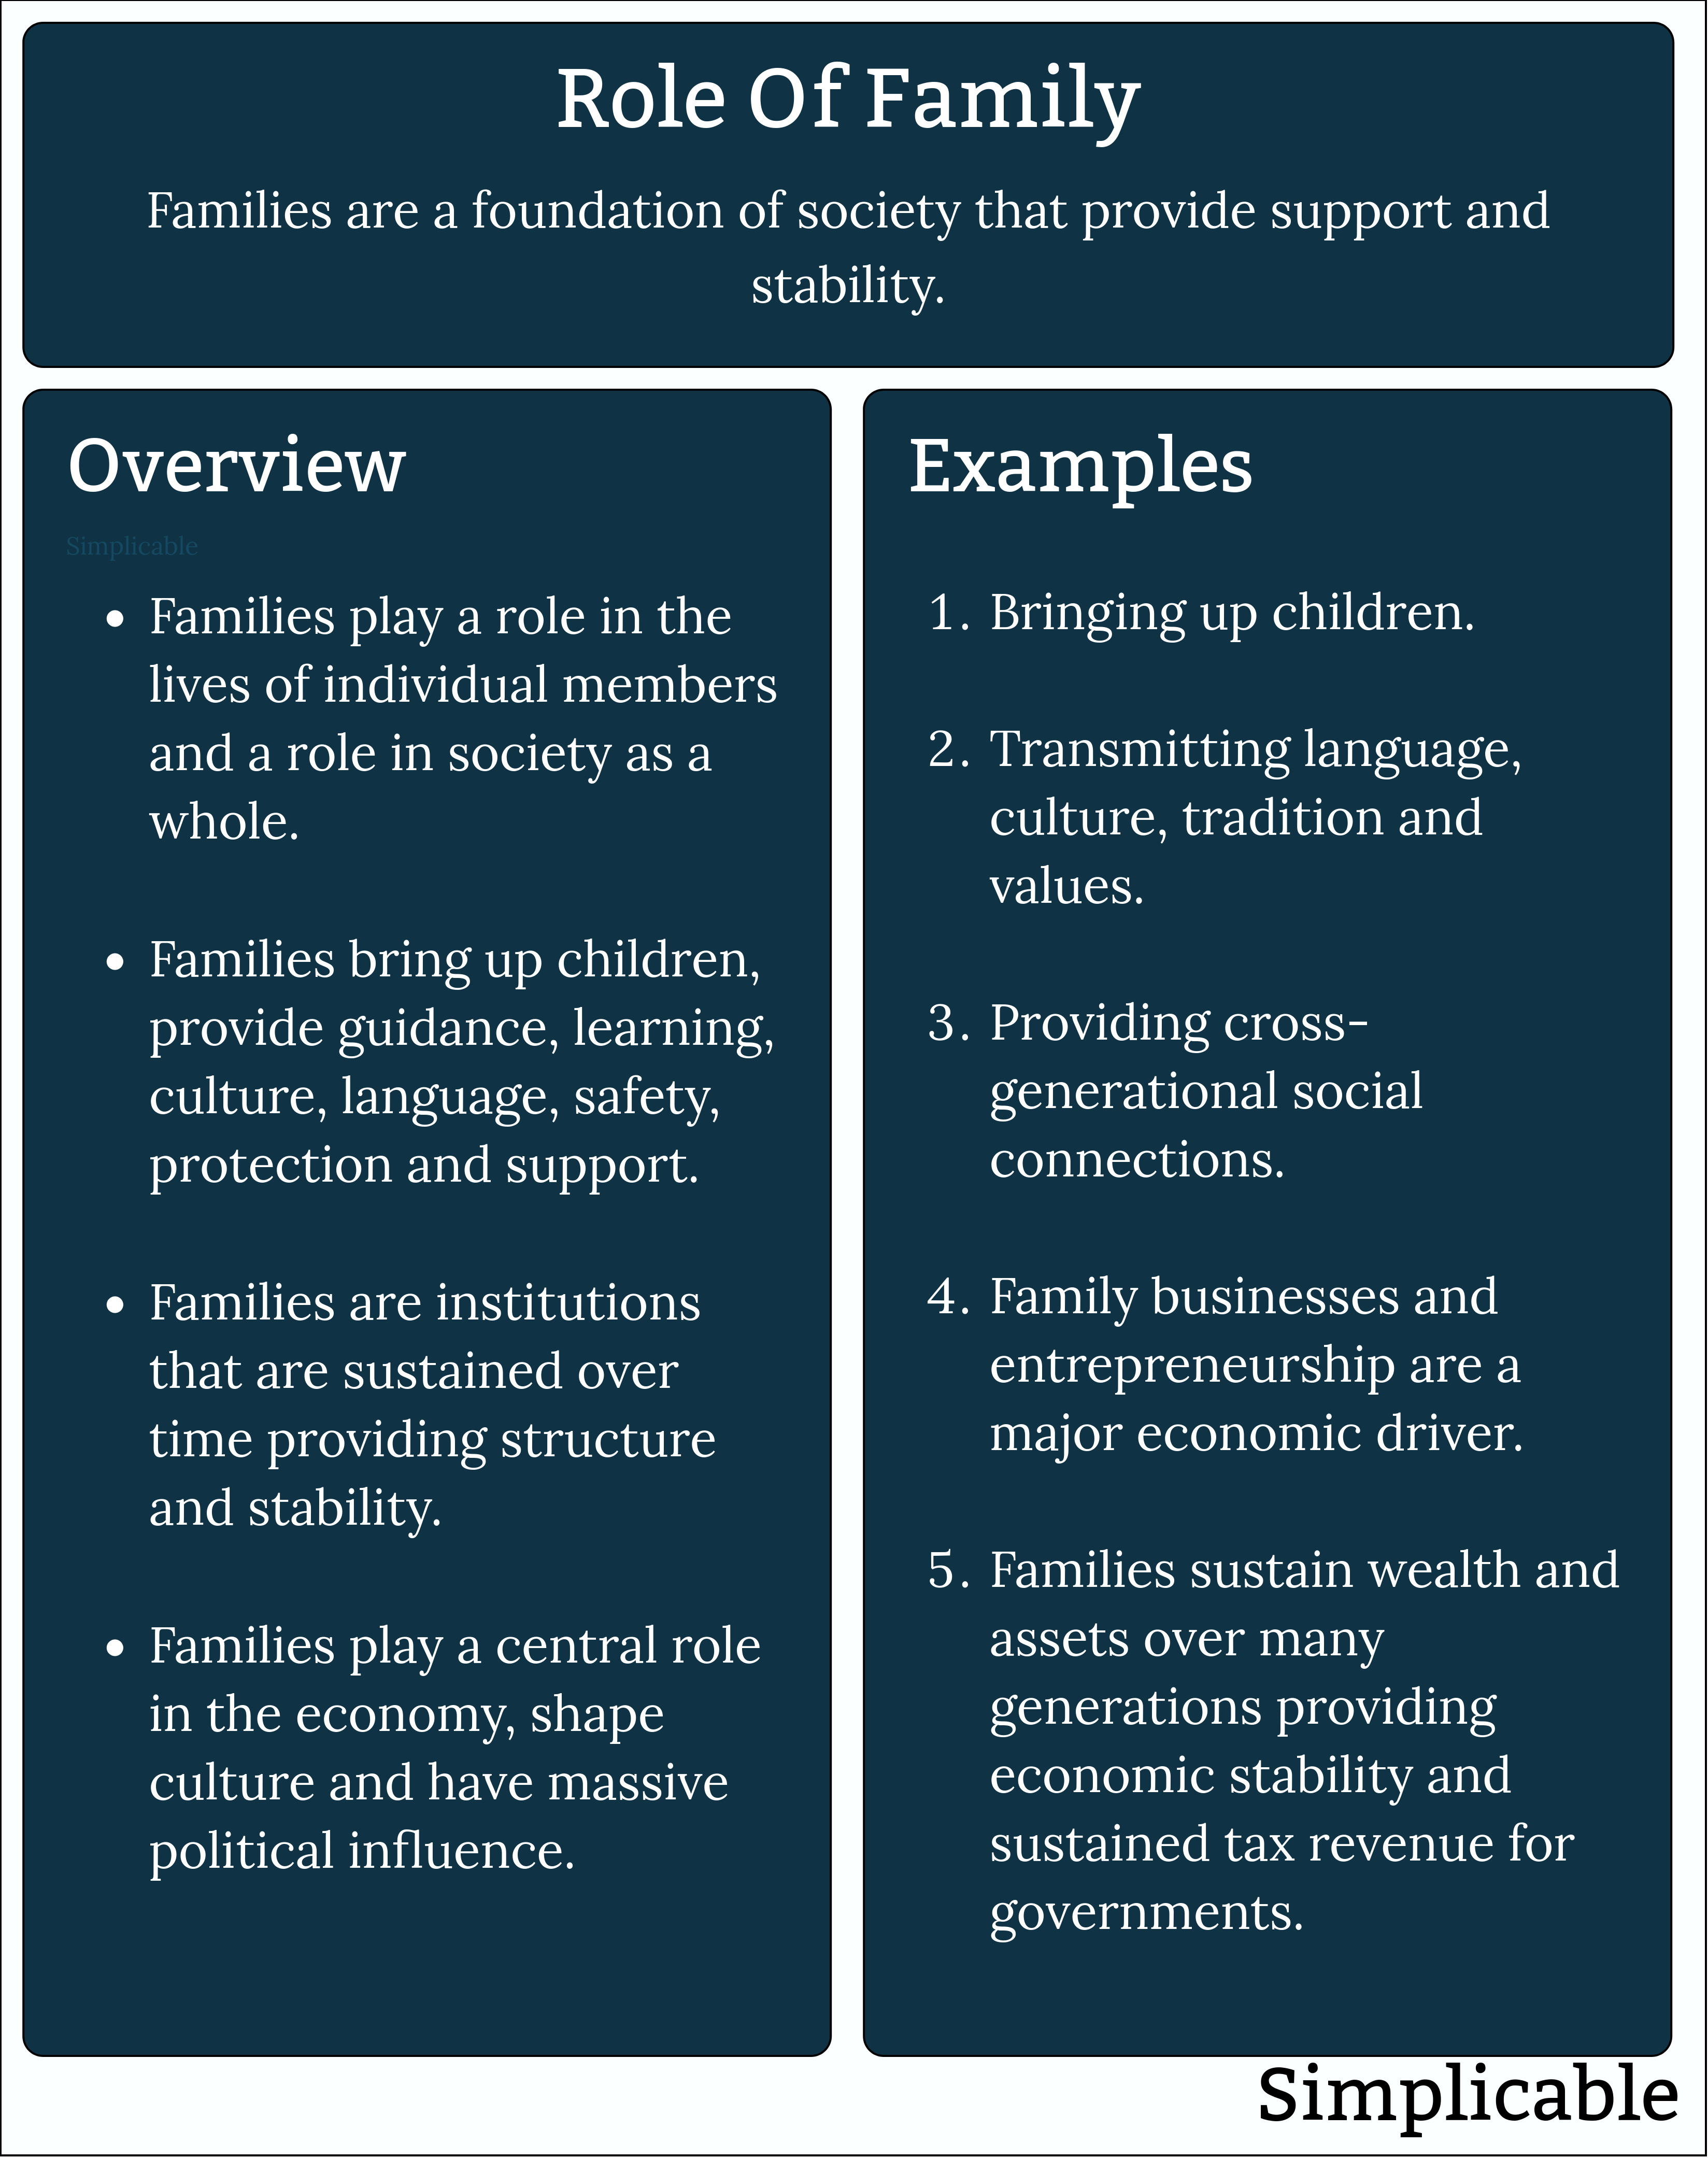 role of family overview and examples